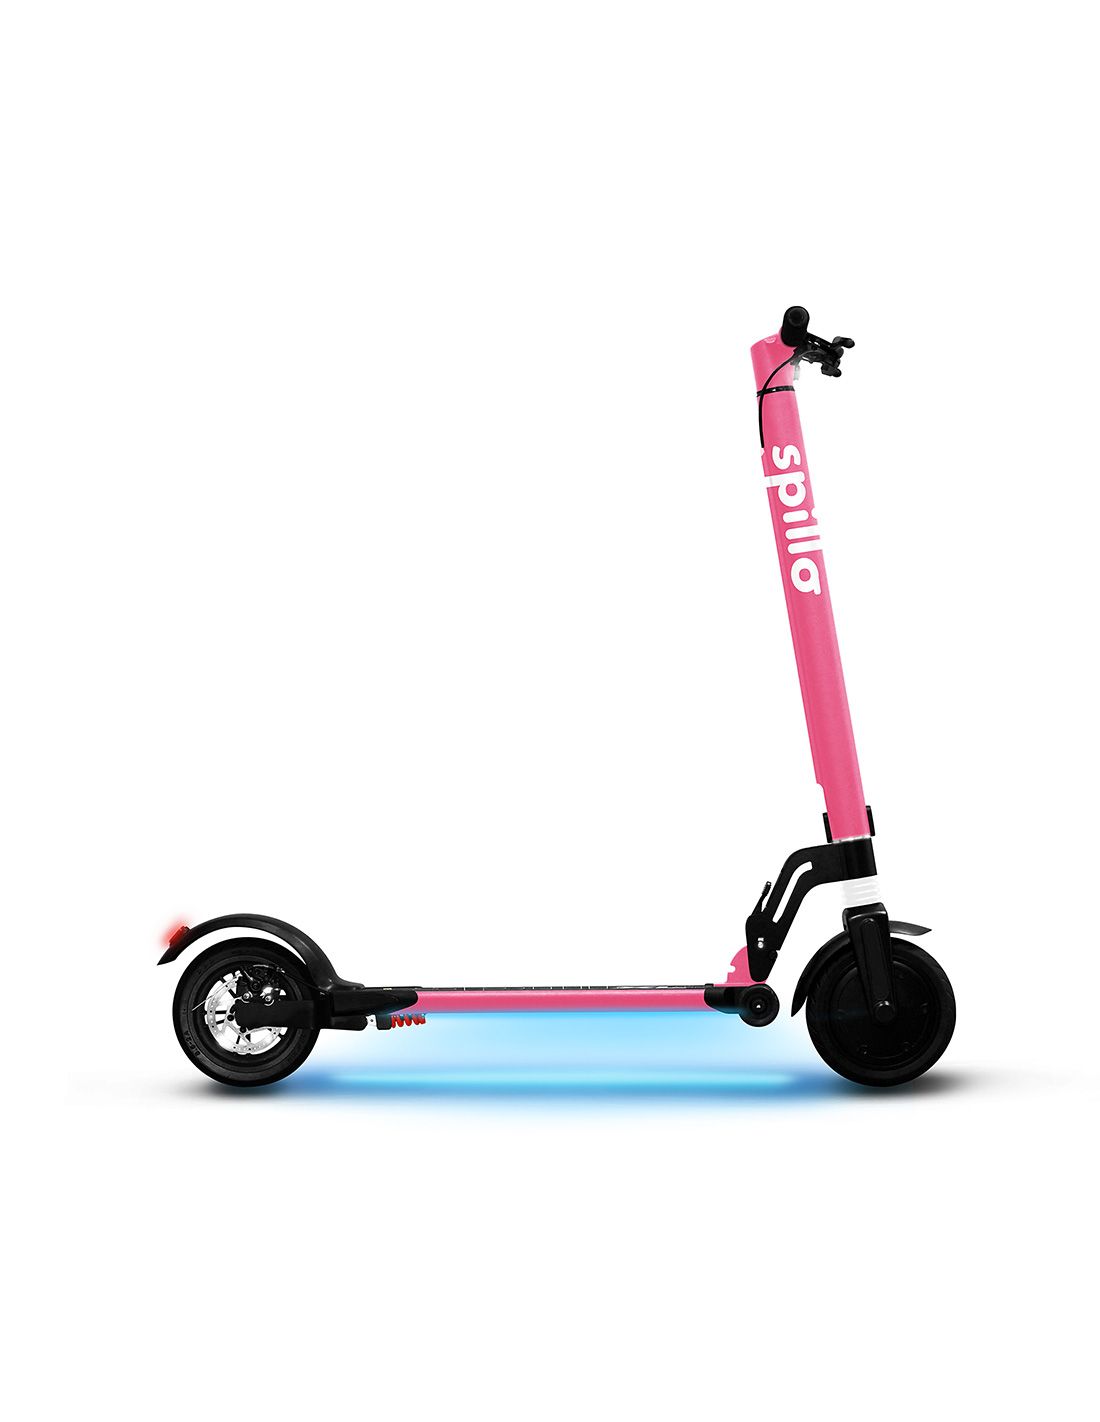 – Spillo Elettrico ONE XL 500W PRO The Scooter Pink